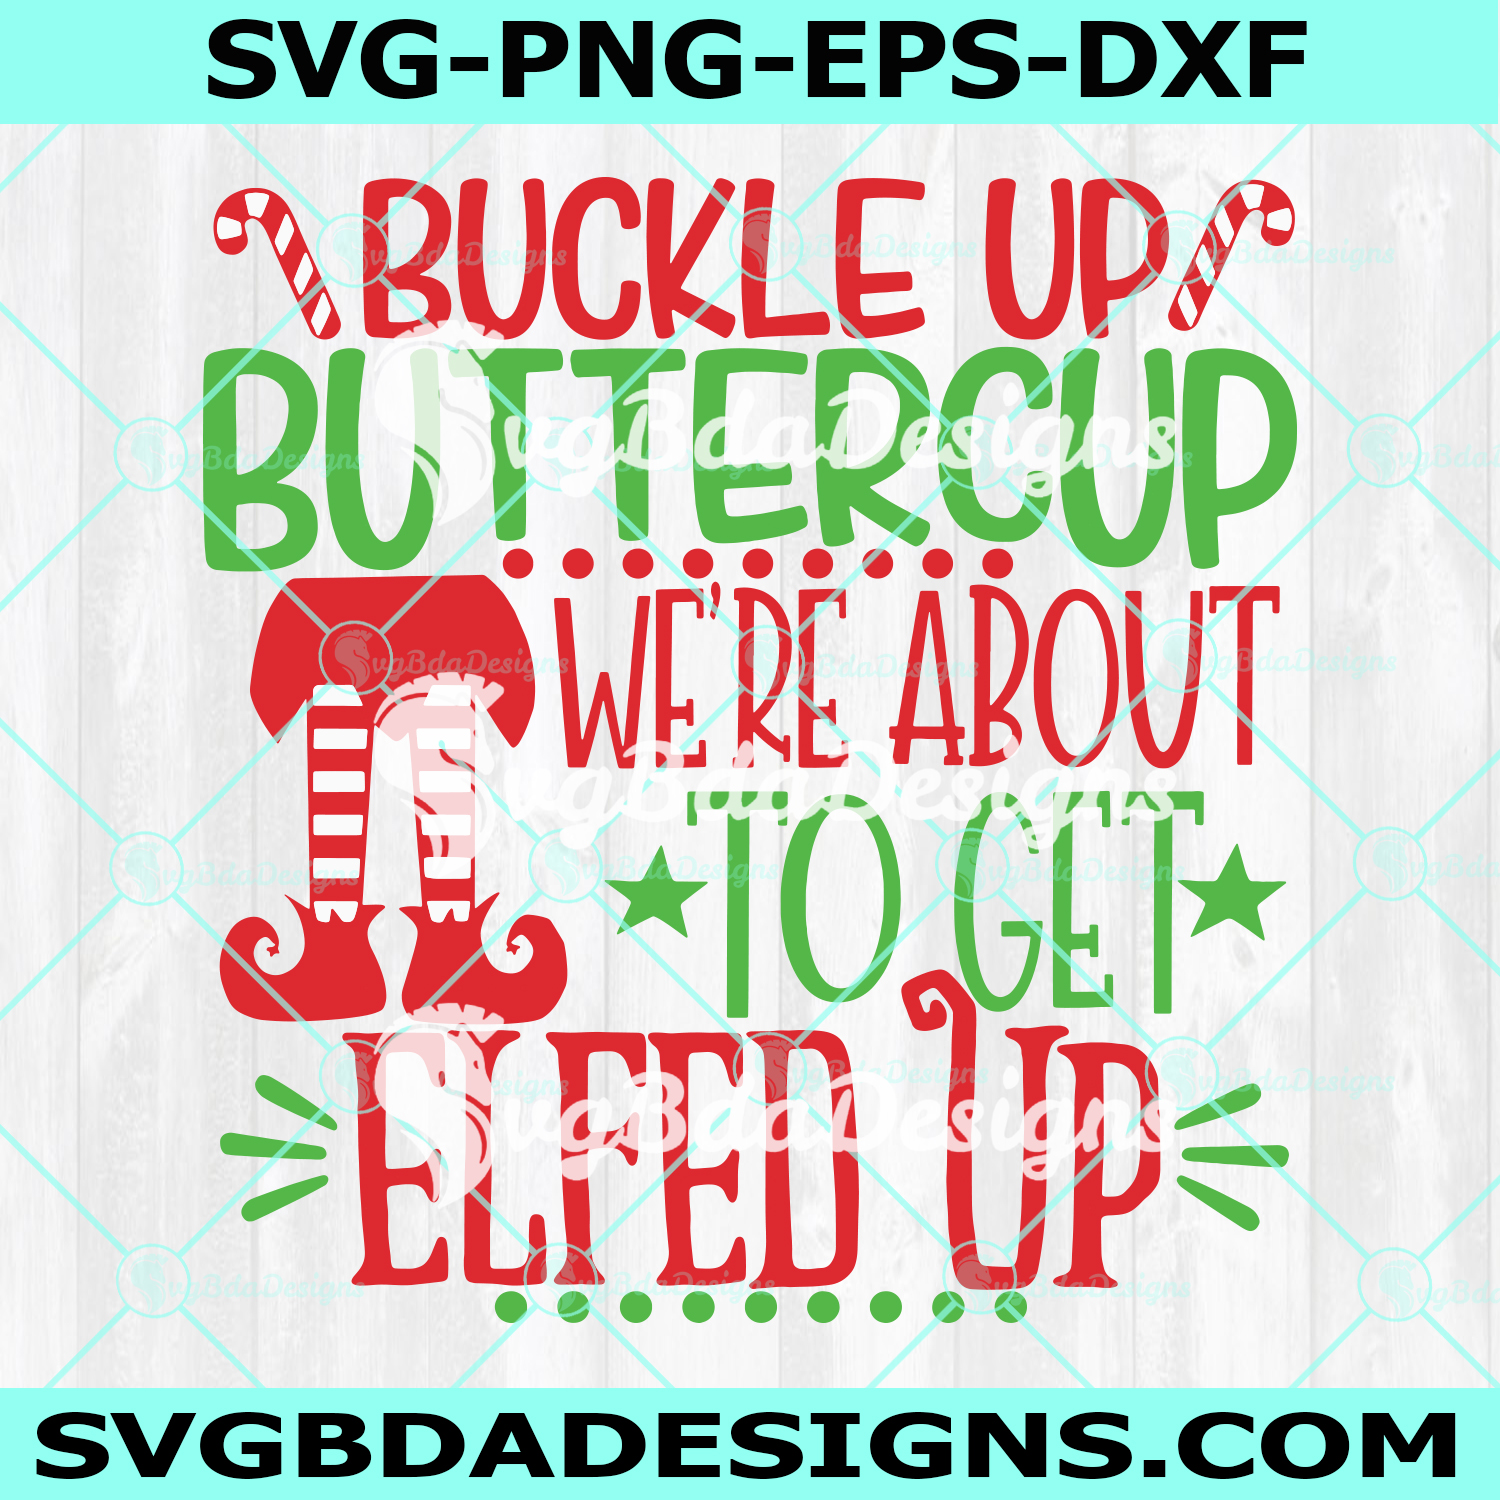 Buckle Up Buttercup Ugly Sweater shirt Svg, Xmas Ugly Sweatshirt Svg, Christmas Ugly Sweater Svg,Ugly Christmas Sweater Svg, Digital Download